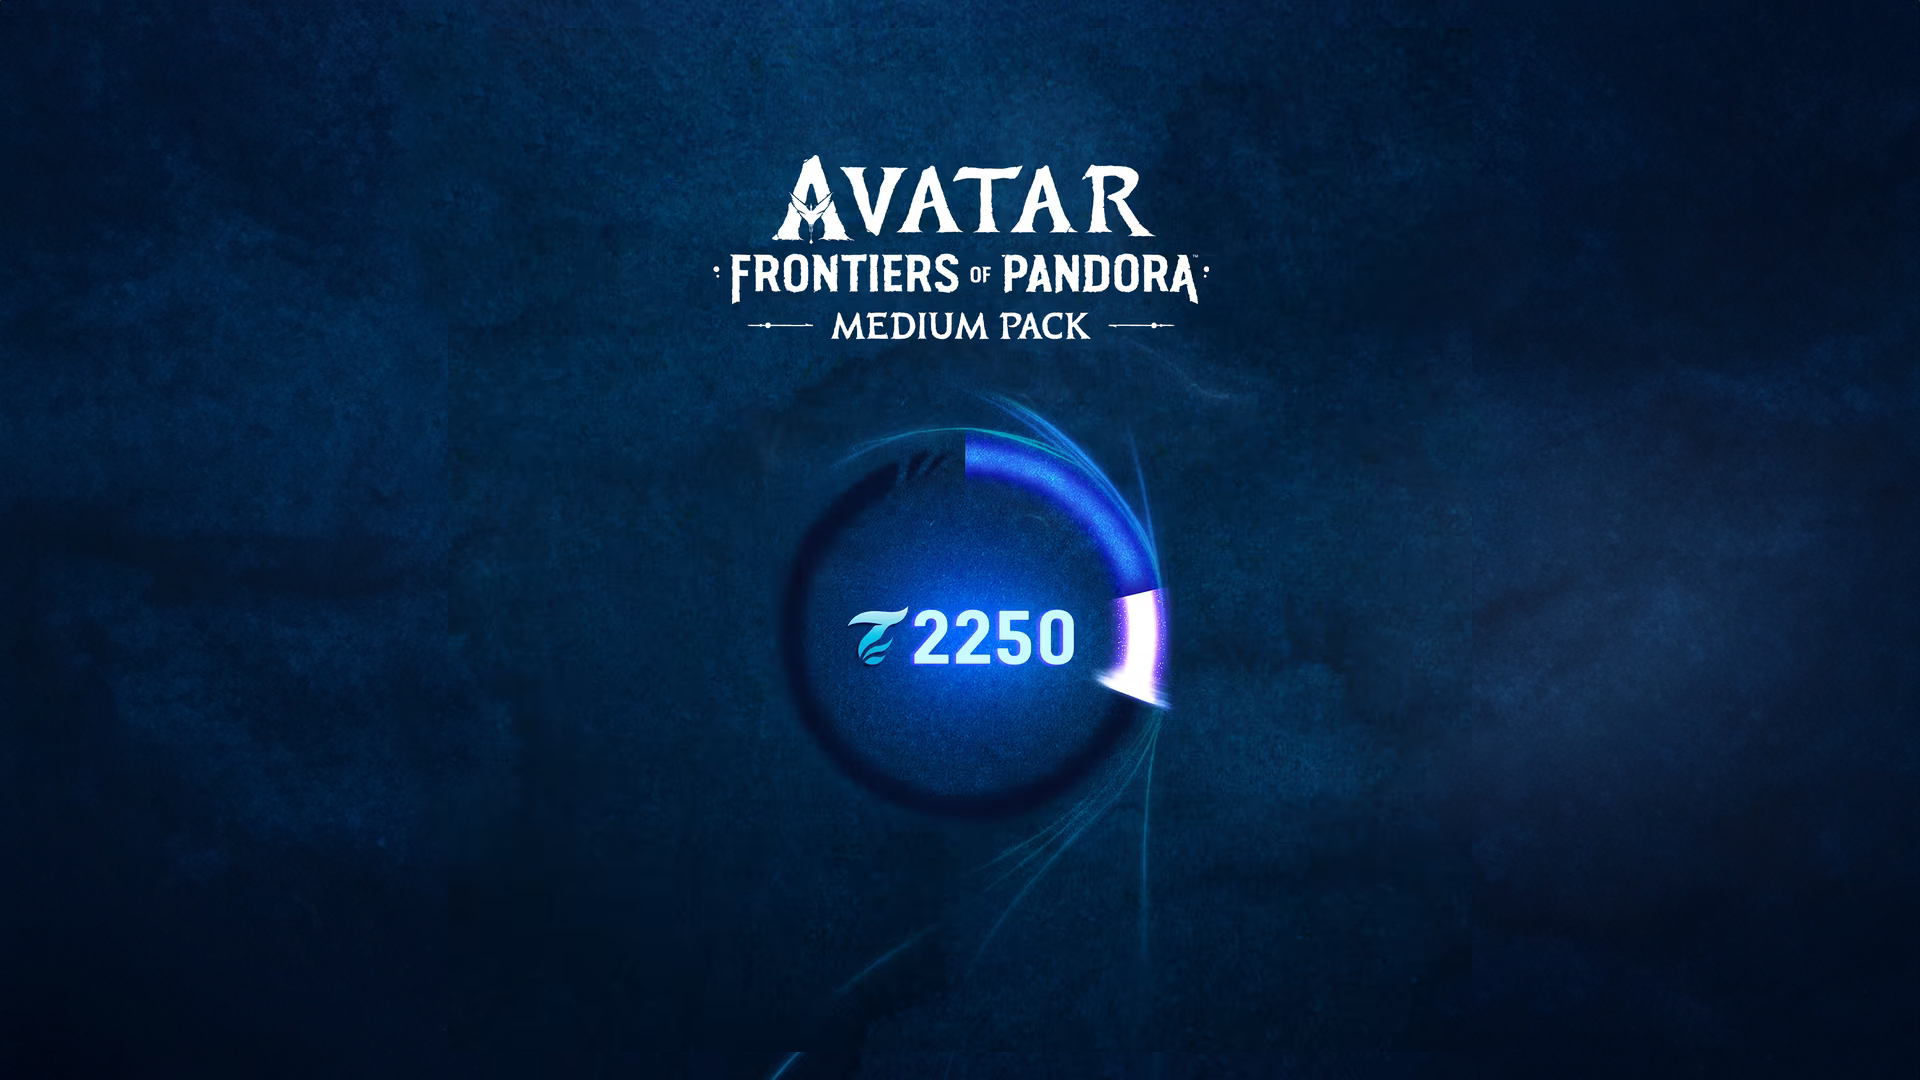 Avatar: Frontiers of Pandora - 2250 VC Pack Xbox Series X|S CD Key 20.47 $